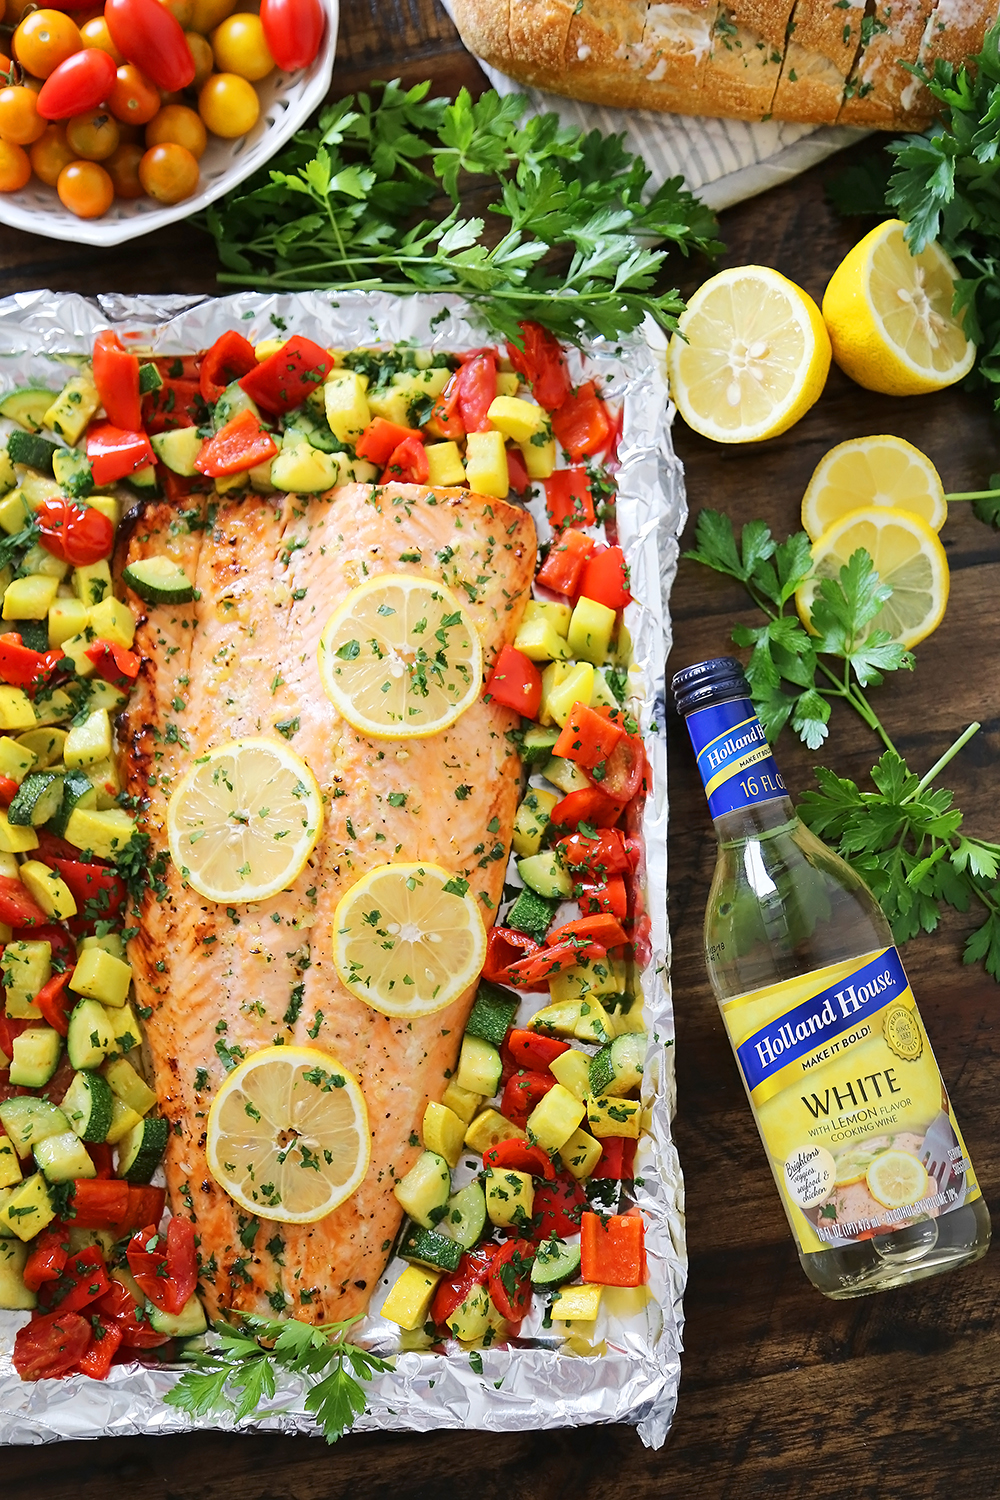 Lemon-Garlic Honey Butter Salmon & Veggies in Foil - Juicy, flaky roasted salmon with lemon-garlic honey butter and tender summer veggies! One pan full of hearty, healthy goodness! thecomfortofcooking.com